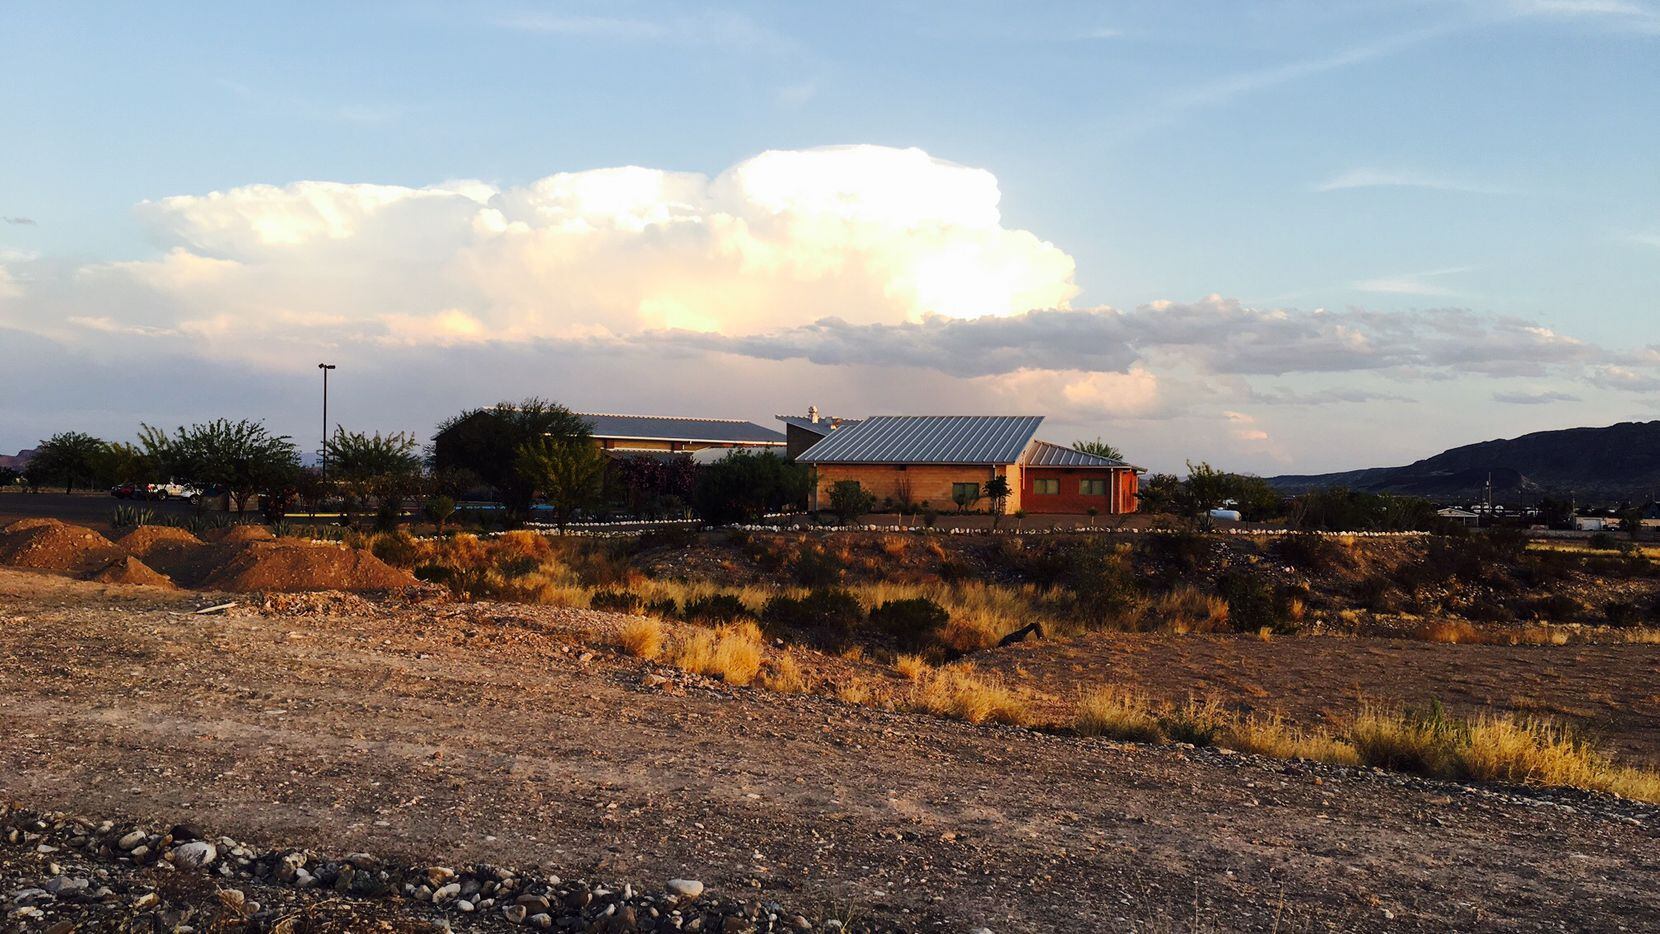 The isolated Texas town, Presidio depends on neighbors in Ojinaga, Mexico. People cross the...